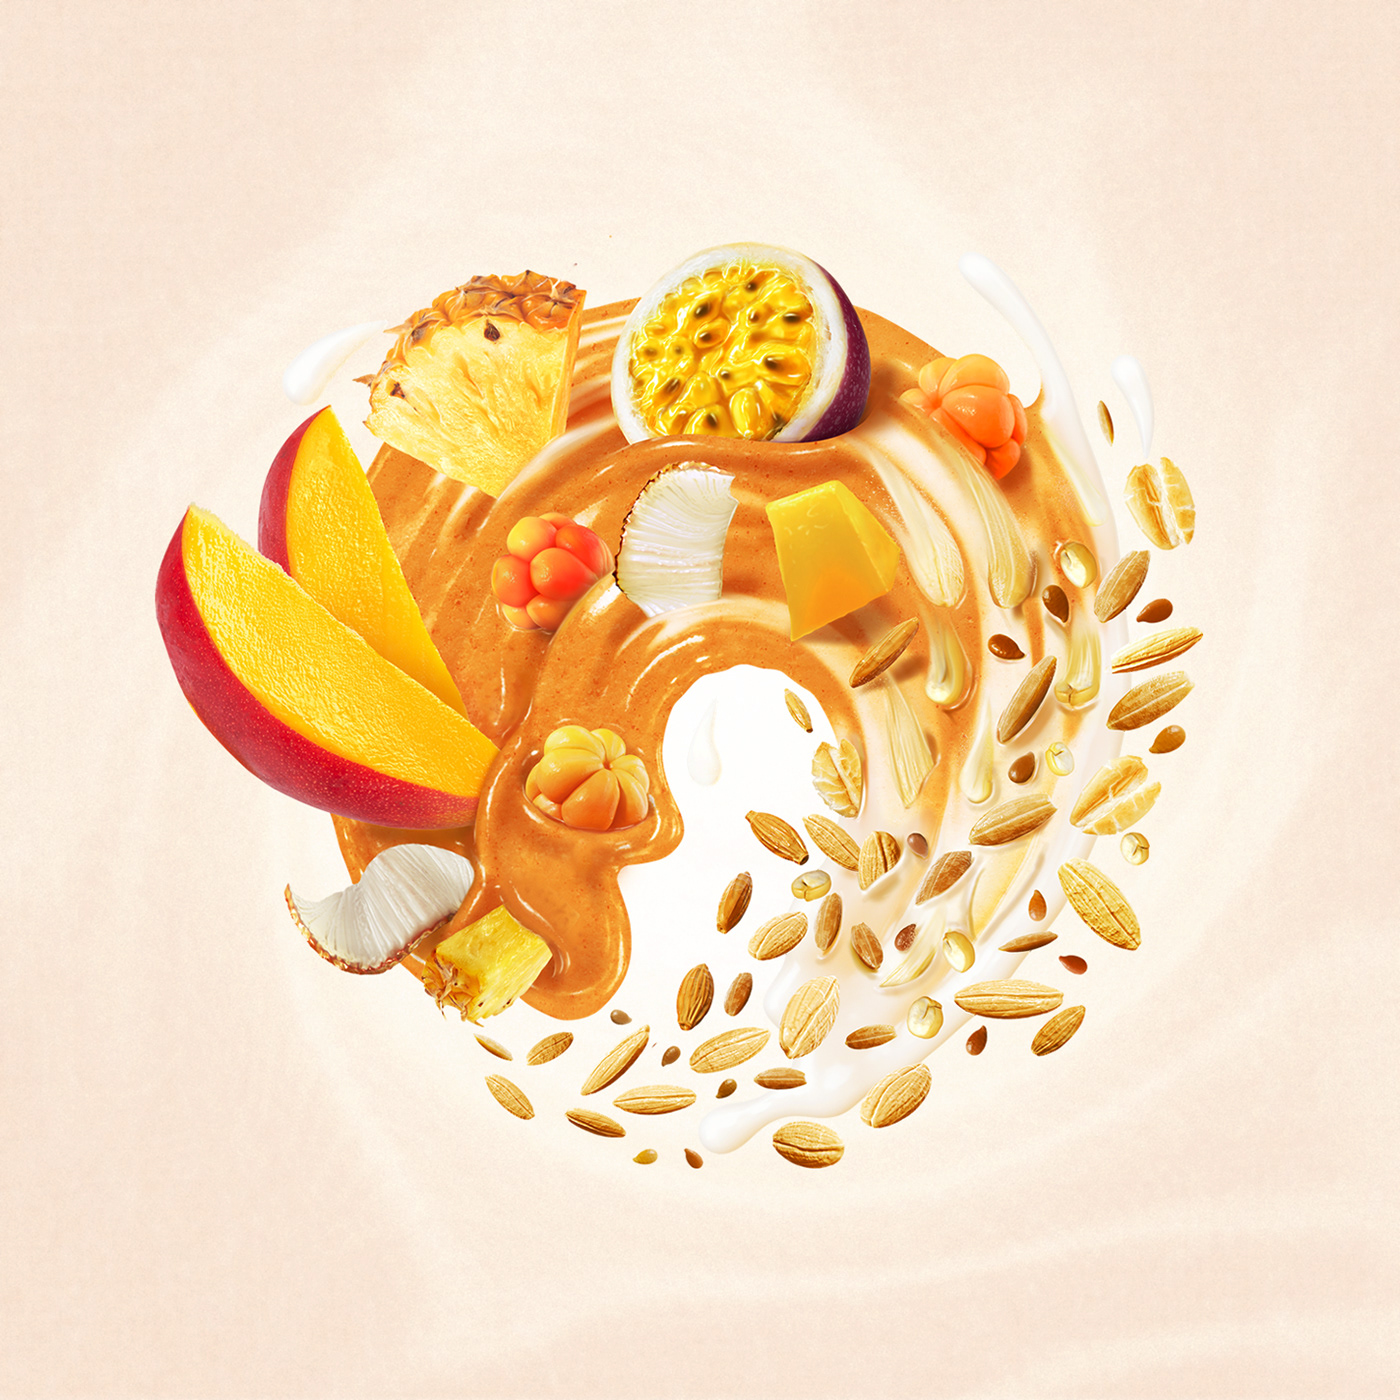 3D illustration key visuals for Skur Yogurt with tropical made on Cinema 4D and Red Shift